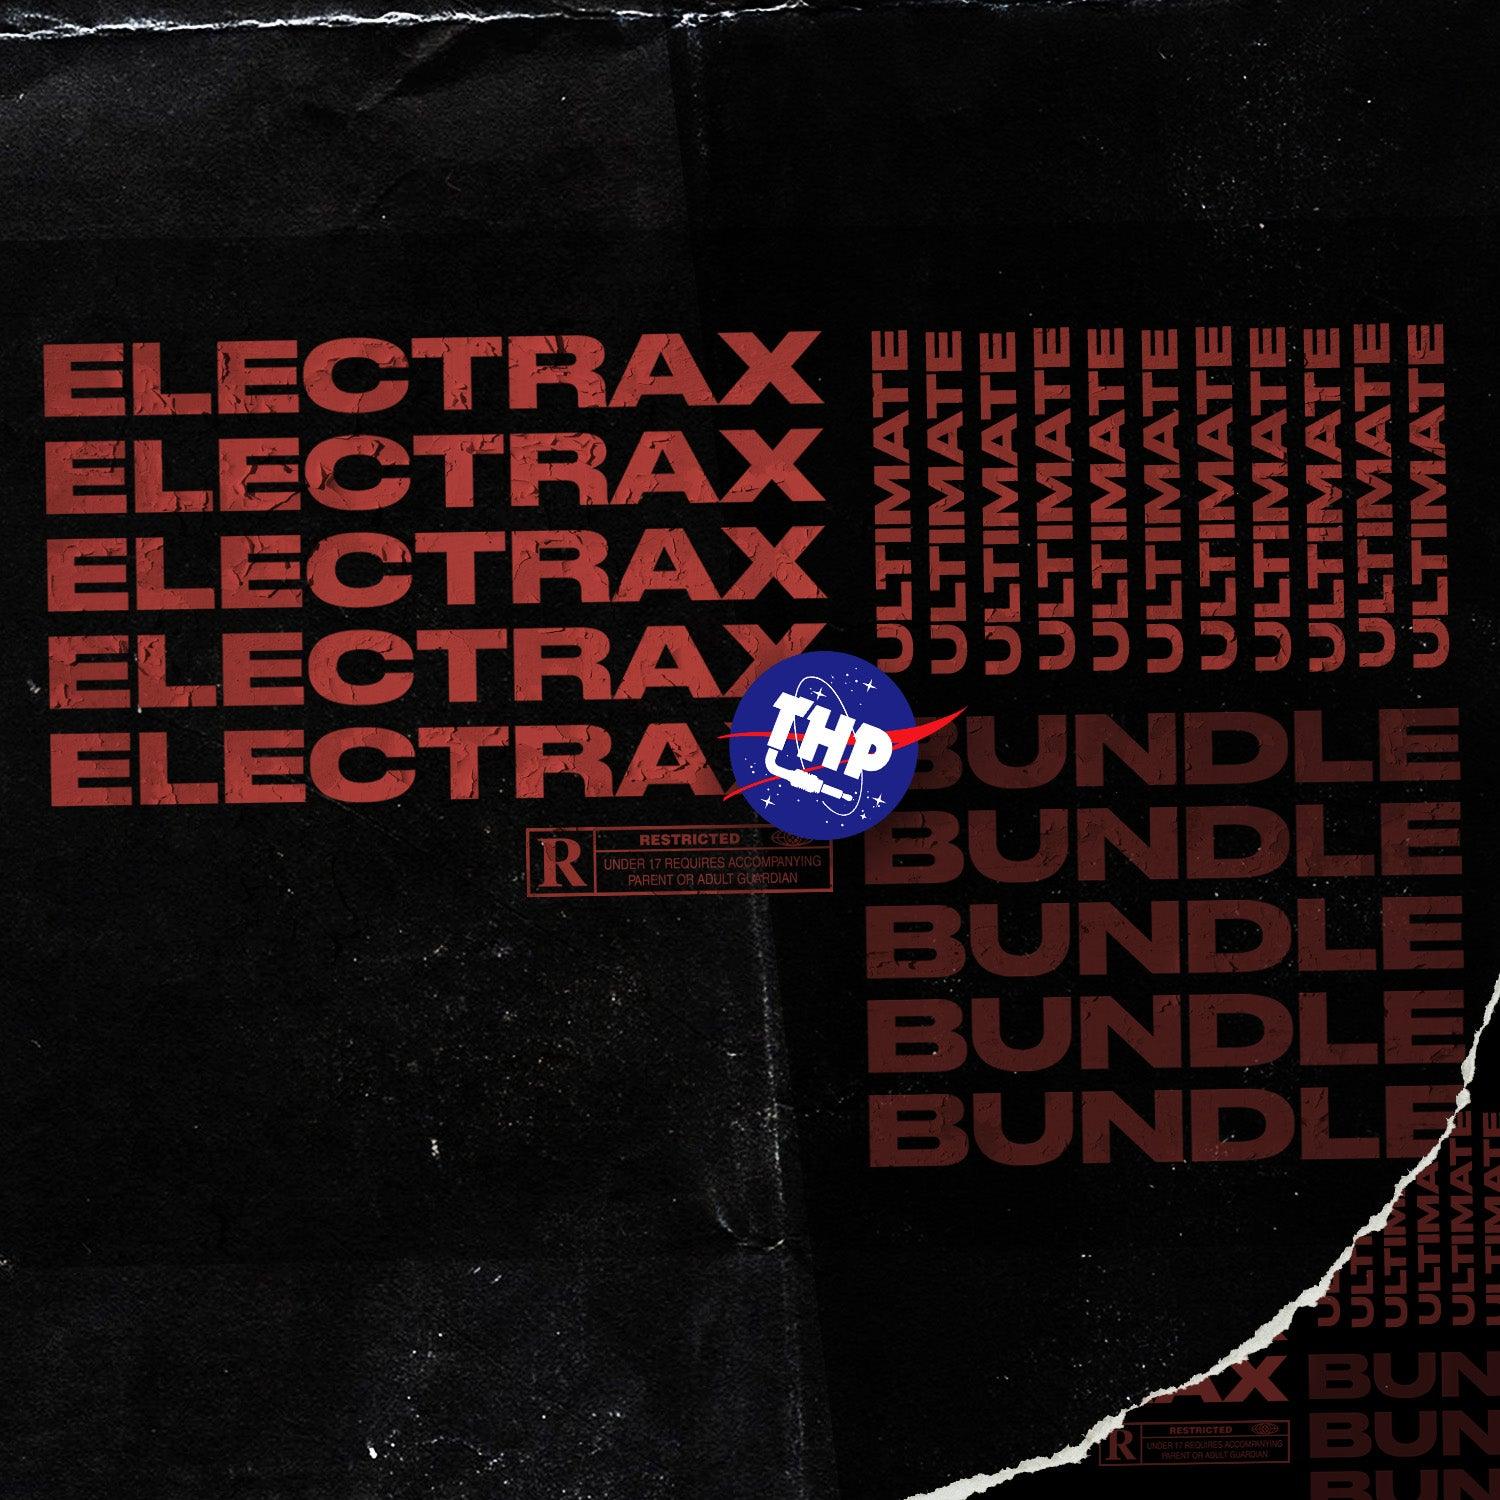 THP - The Ultimate ElectraX Presets Bundle - The Highest Producers